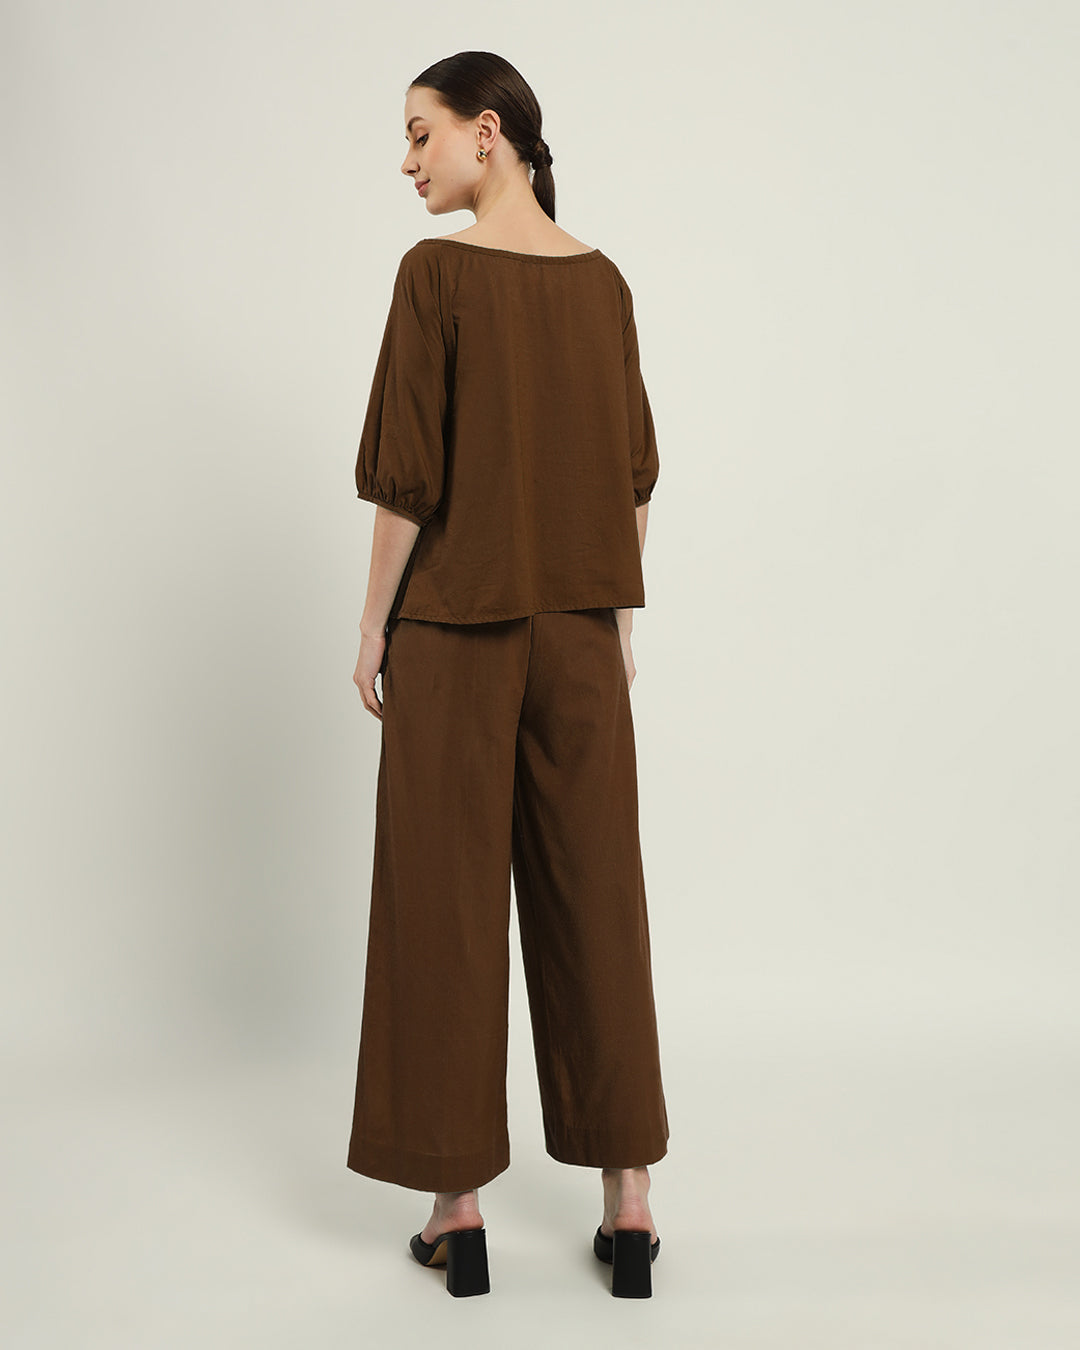 Nutshell Effortless BowtNeck Top (Without Bottoms)